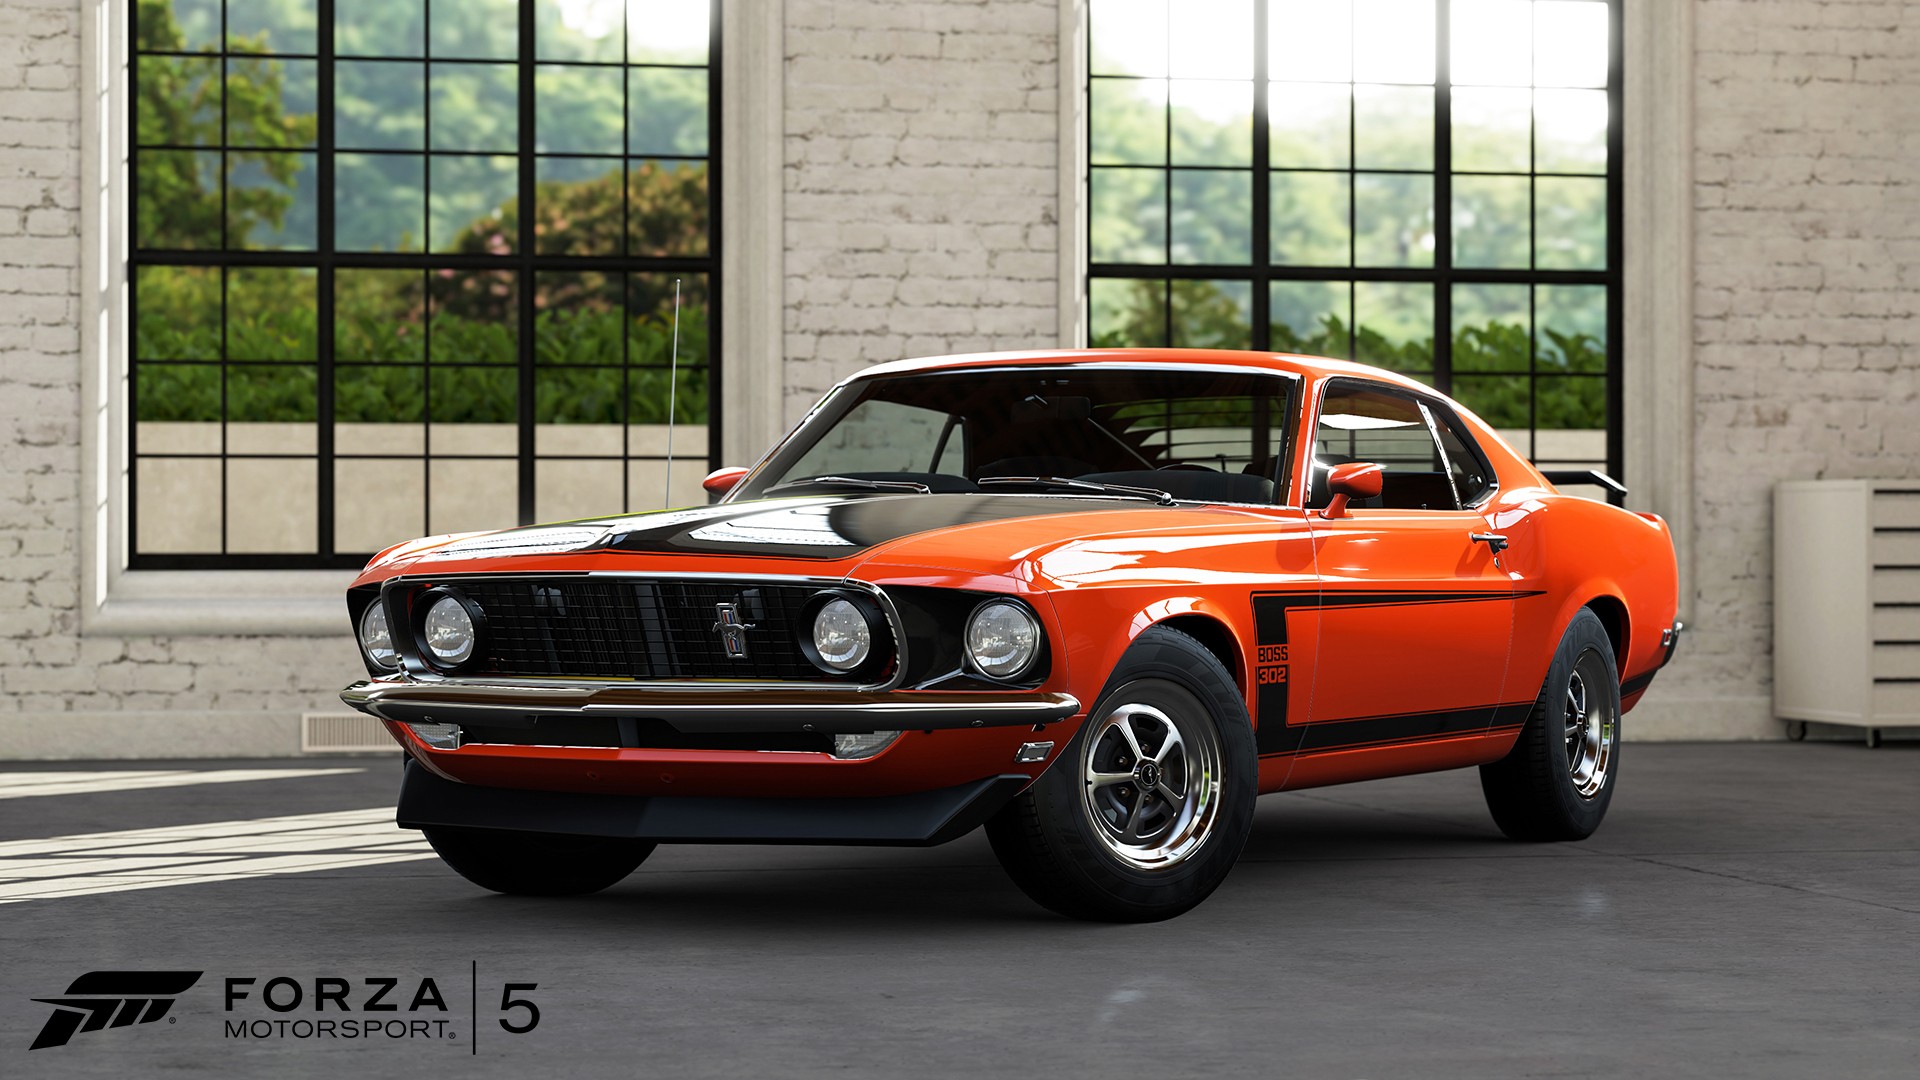 Car Video Games Forza Motorsport 5 Ford Mustang Boss 302 1920x1080